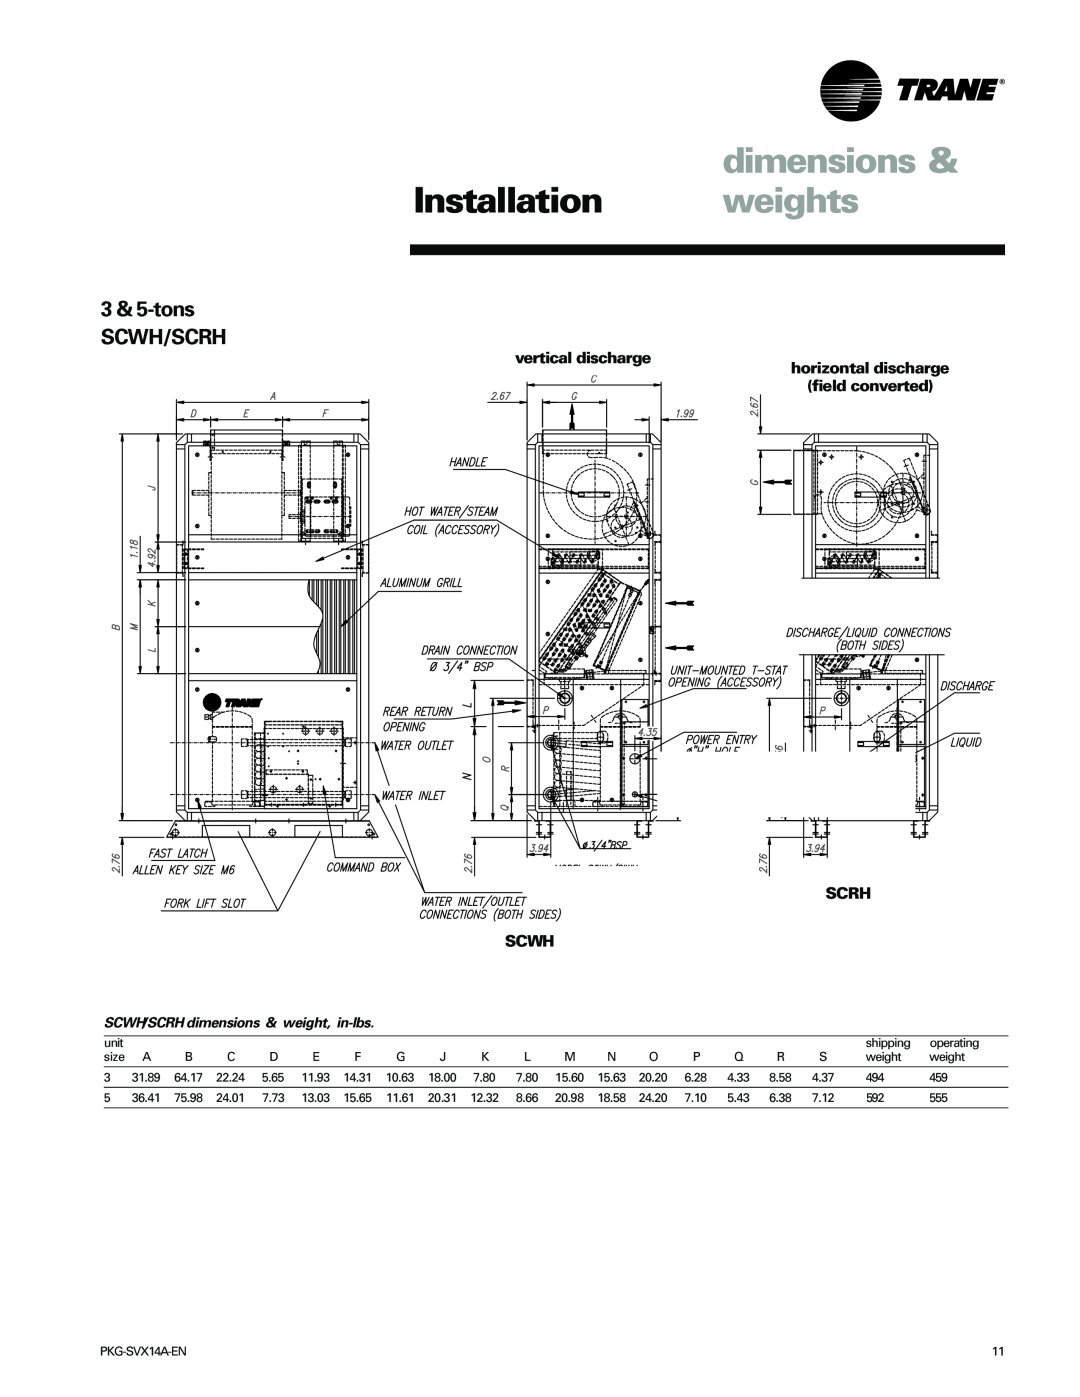 Trane manual dimensions, Installation weights, 3 & 5-tons SCWH/SCRH, vertical discharge SCWH 